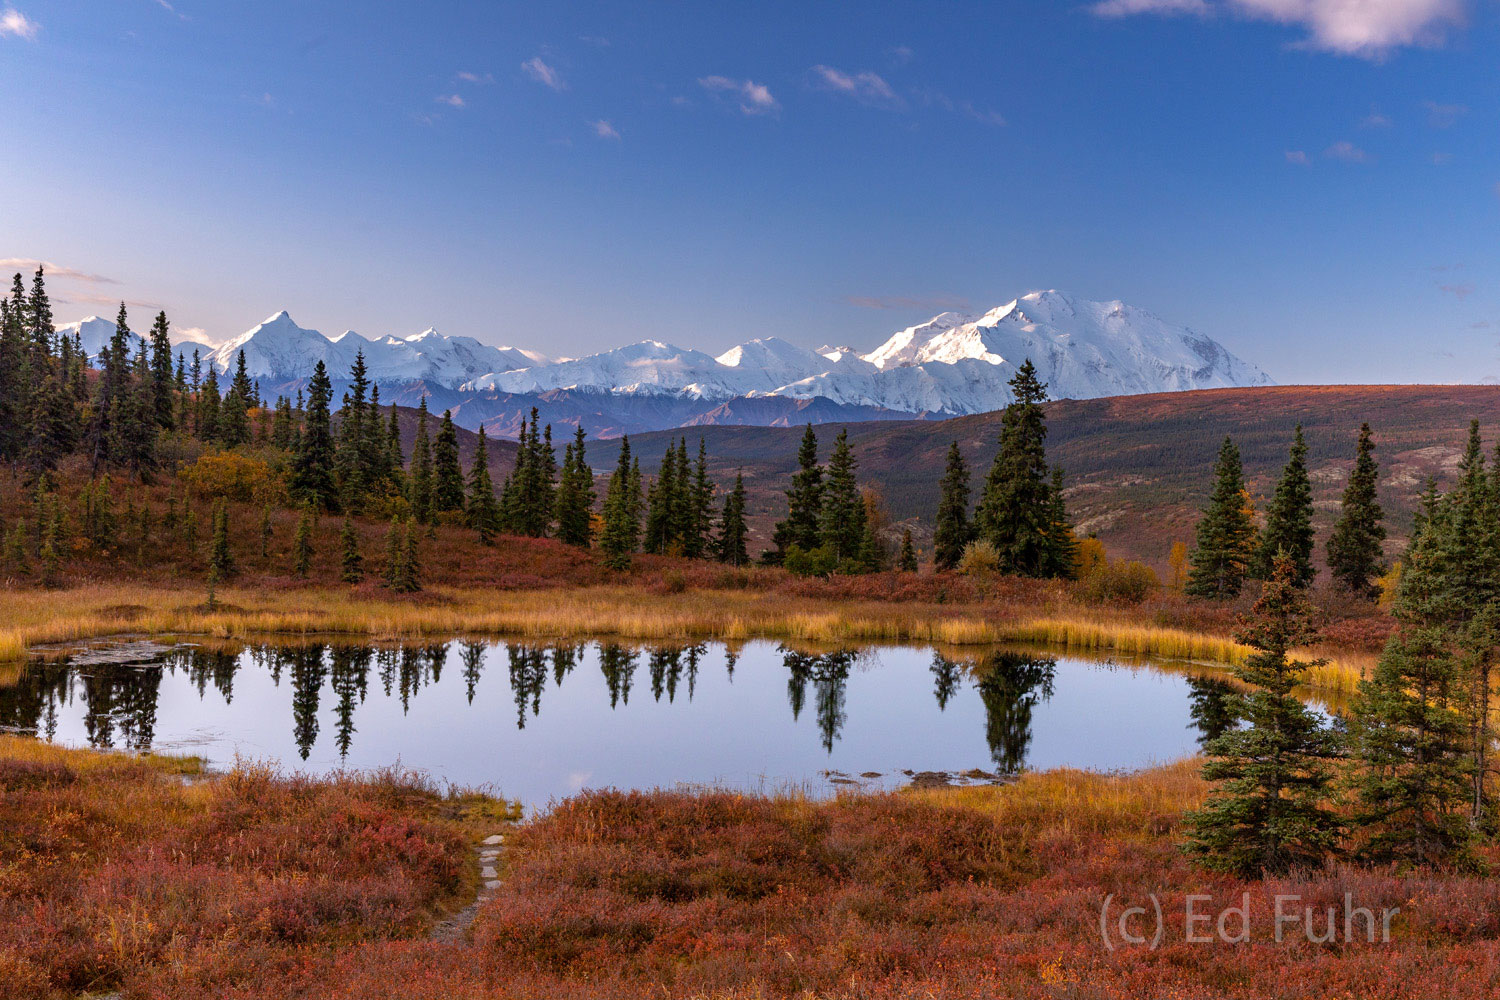 The Alaskan Range and Denali beckon in the distance beyond Nugget Pond